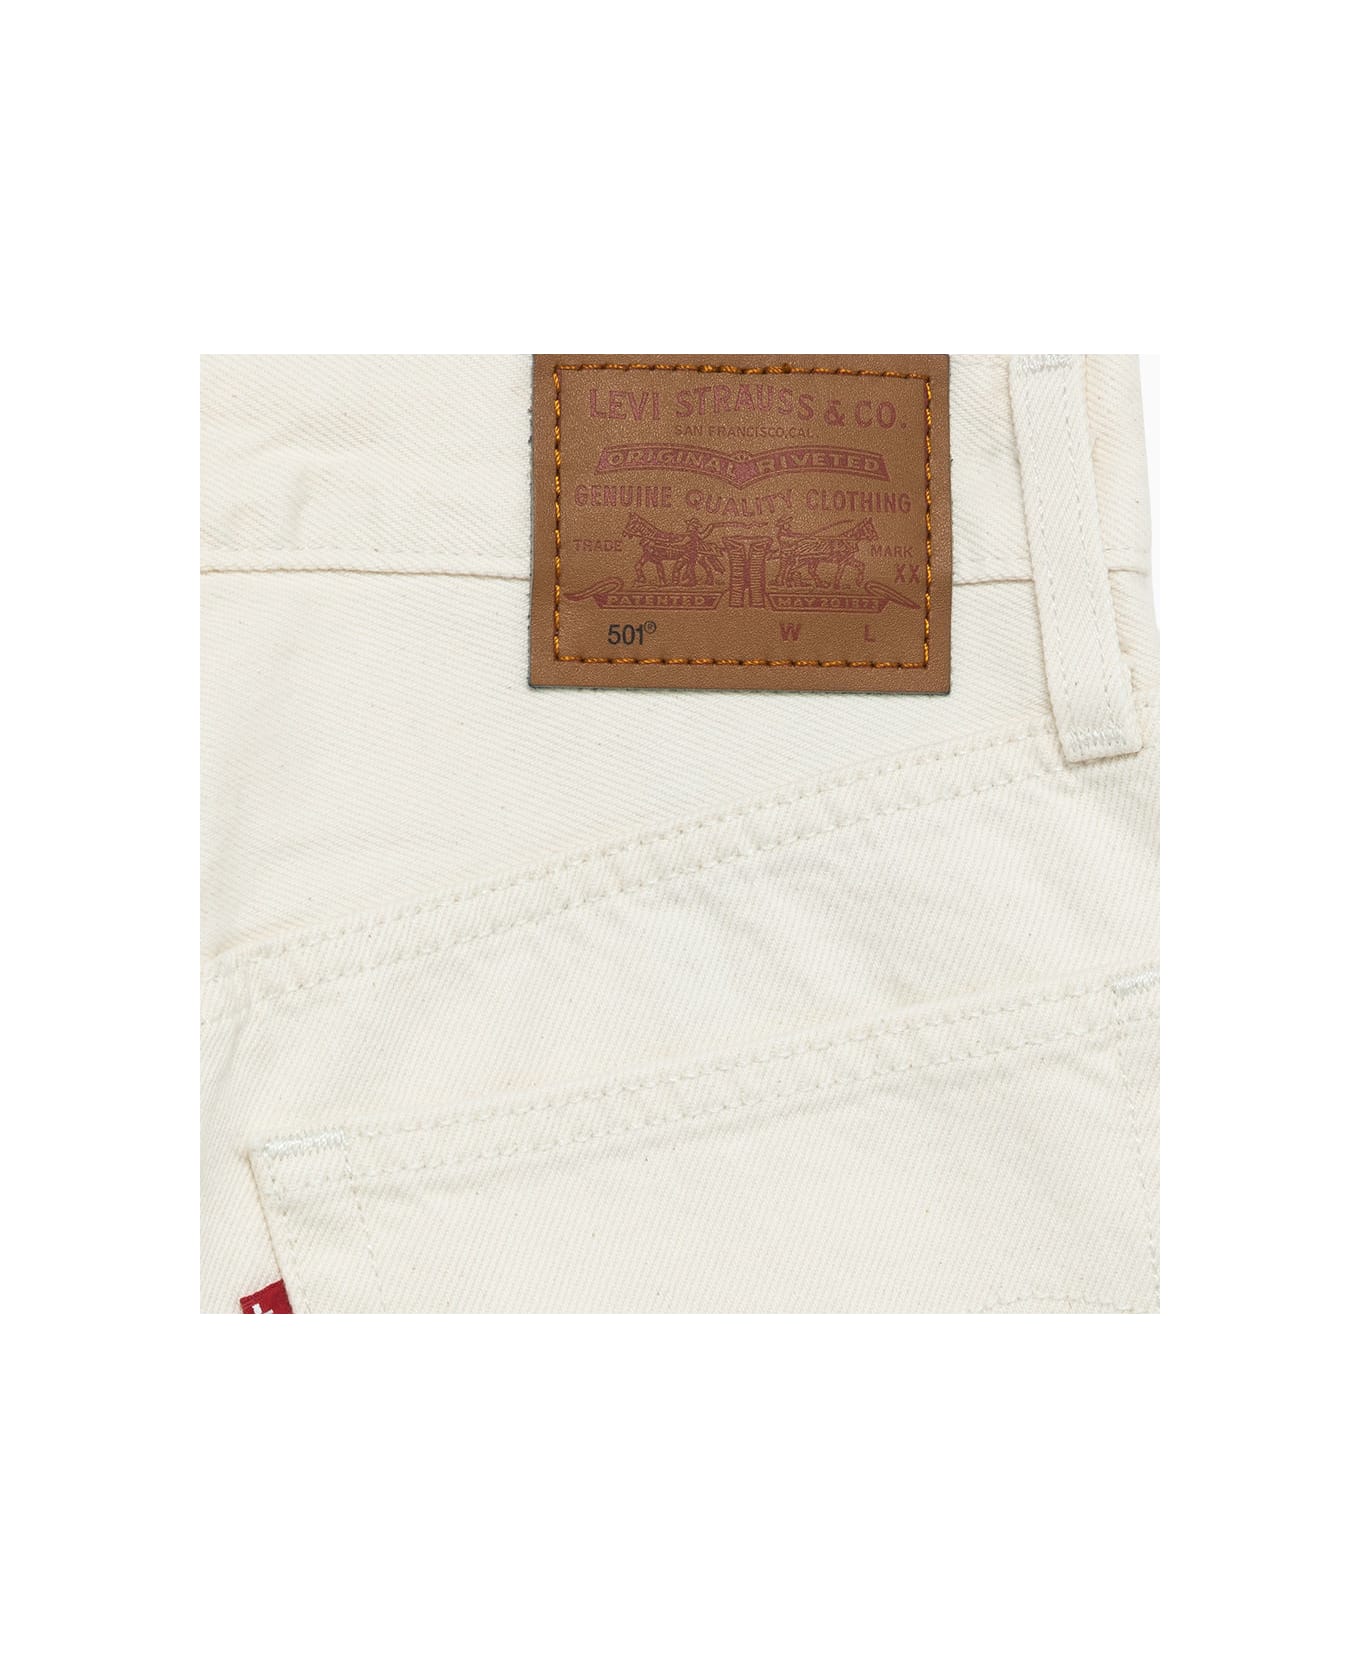 Levi's Levis 501 Cropped Jeans - White ボトムス